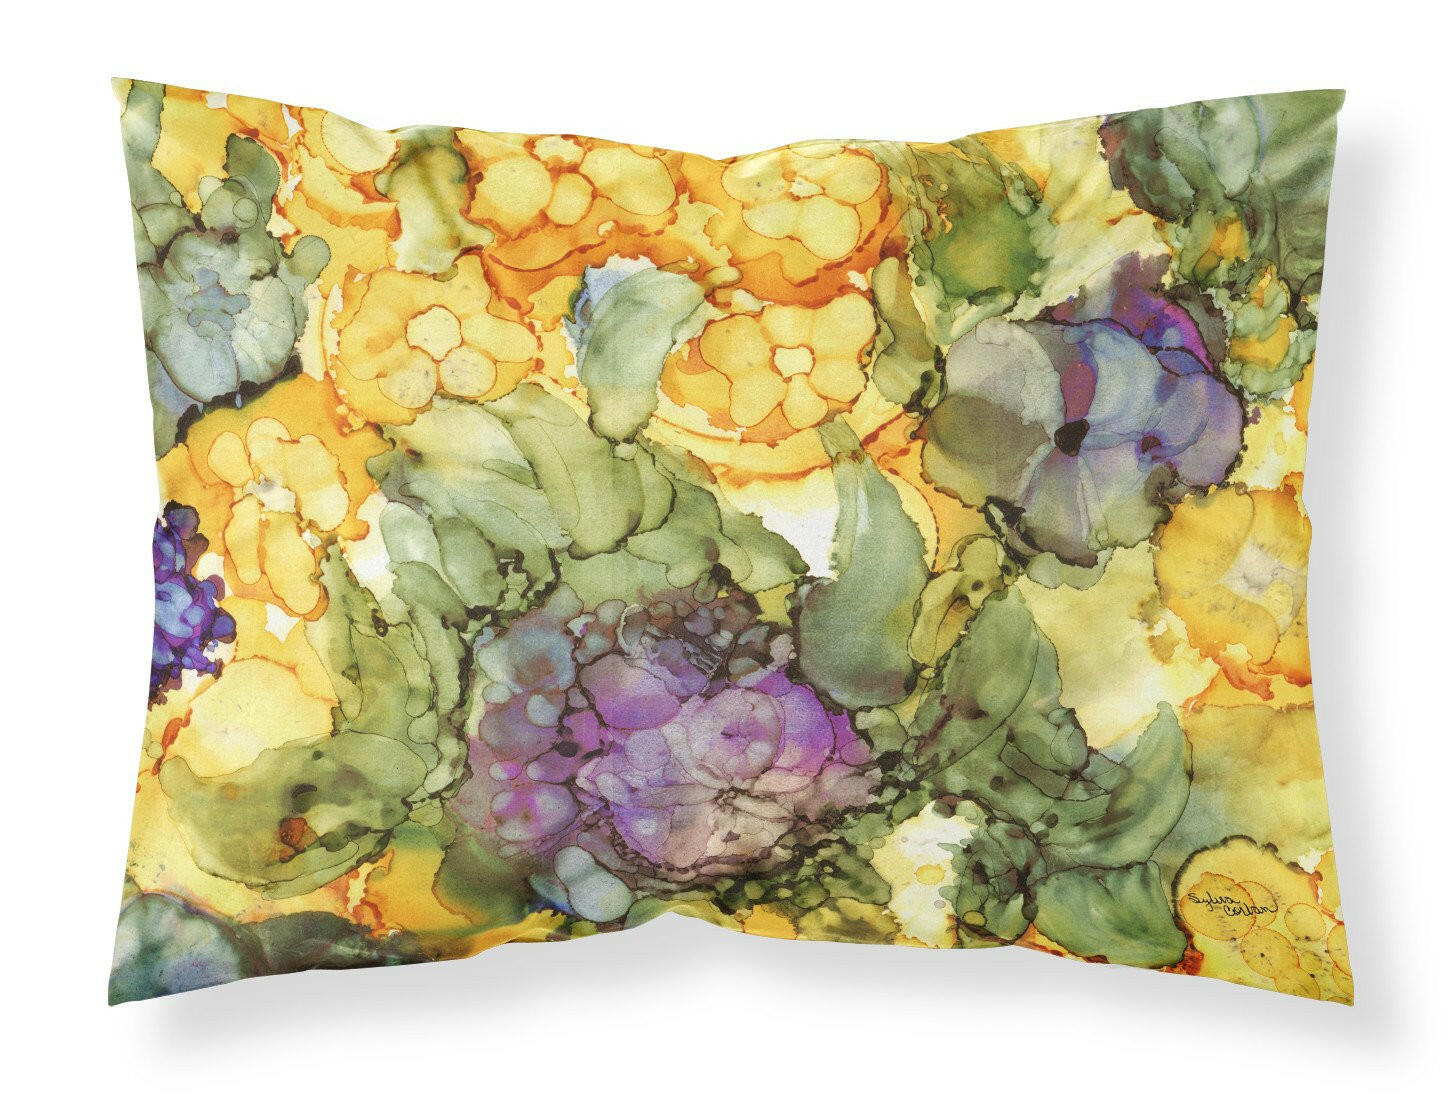 Abstract Flowers Purple and Yellow Fabric Standard Pillowcase 8958PILLOWCASE by Caroline's Treasures